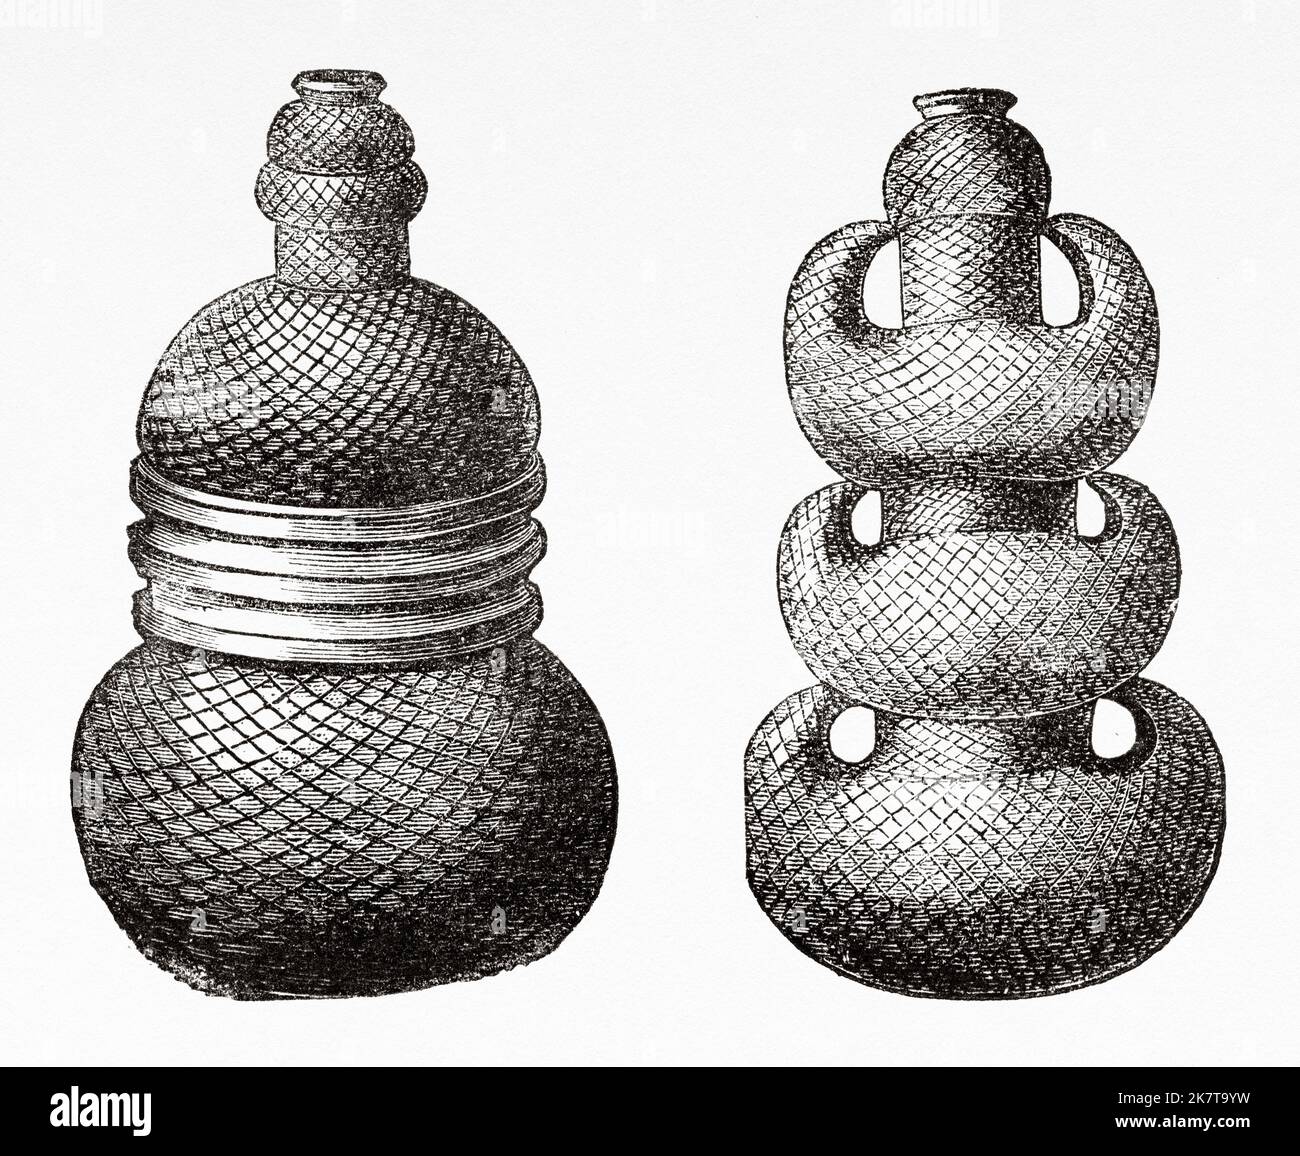 Types of traditional jugs of the Golo people, Democratic Republic of the Congo. Africa. Heart of Africa Three years travels and adventures in the unexplored regions of Central Africa by Georg August Schweinfurth, 1868-1871 Stock Photo